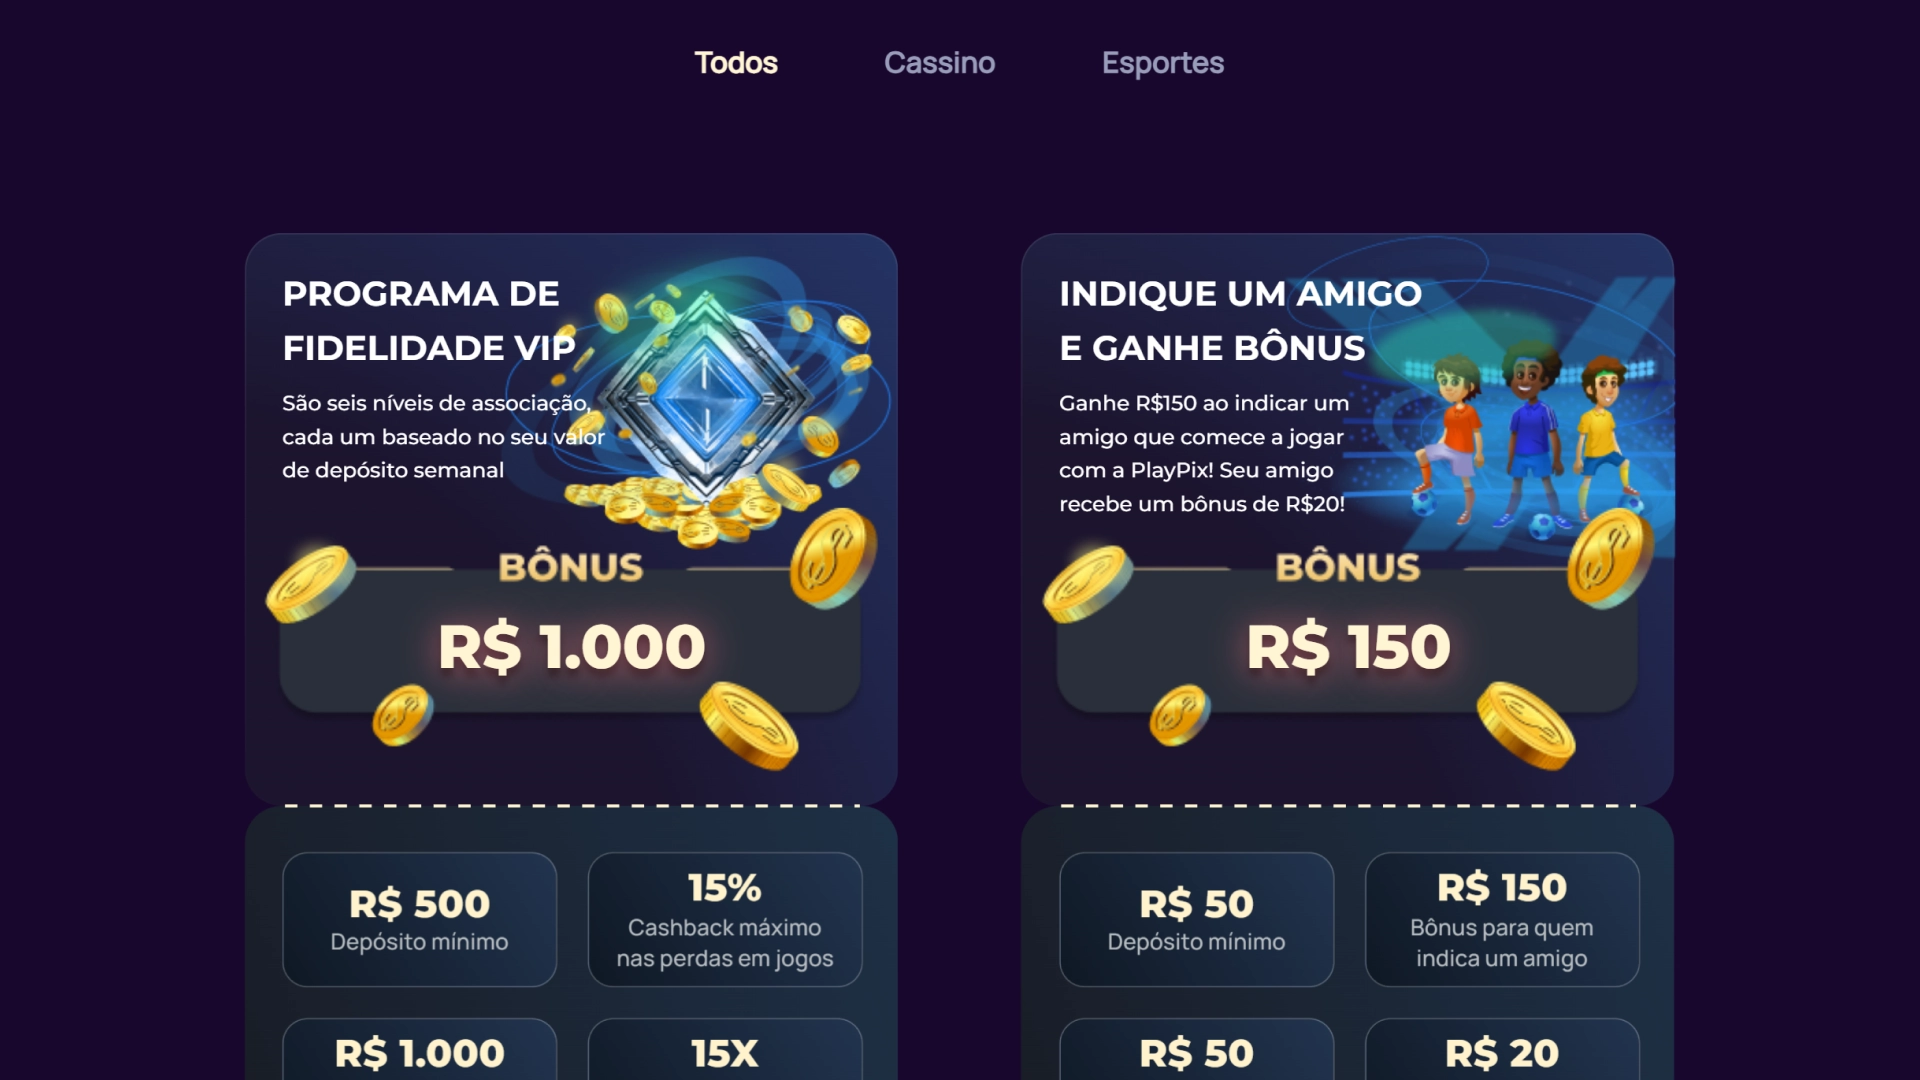 BetMGM Casino: Elevate Your Casino Experience with BetMGM - How To Be More Productive?